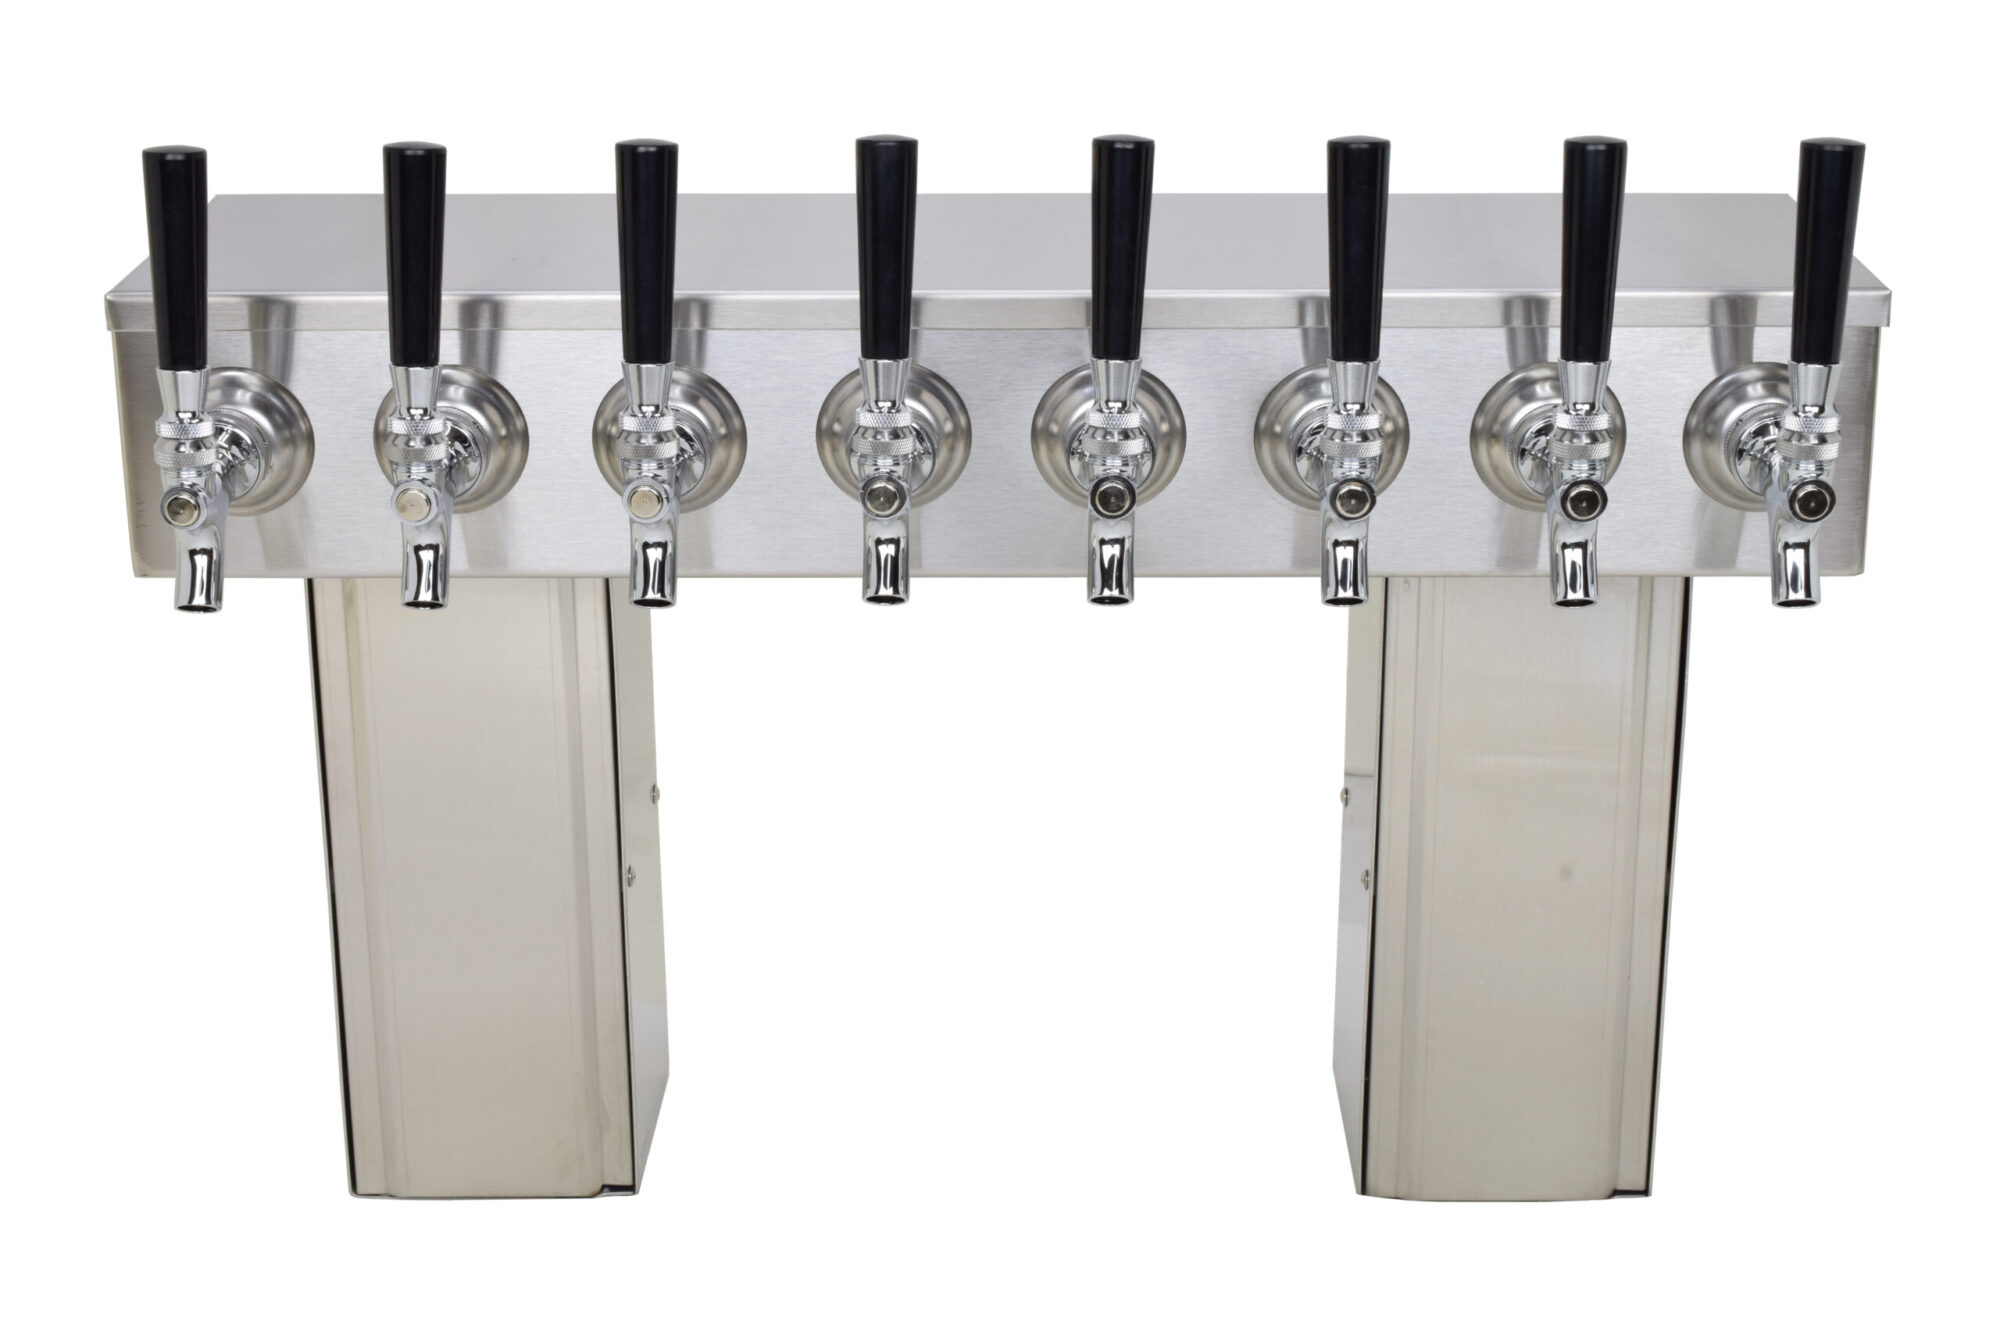 759G-8 Eight Faucet Pass Through Tower with Square Bases - Glycol Ready - NSF